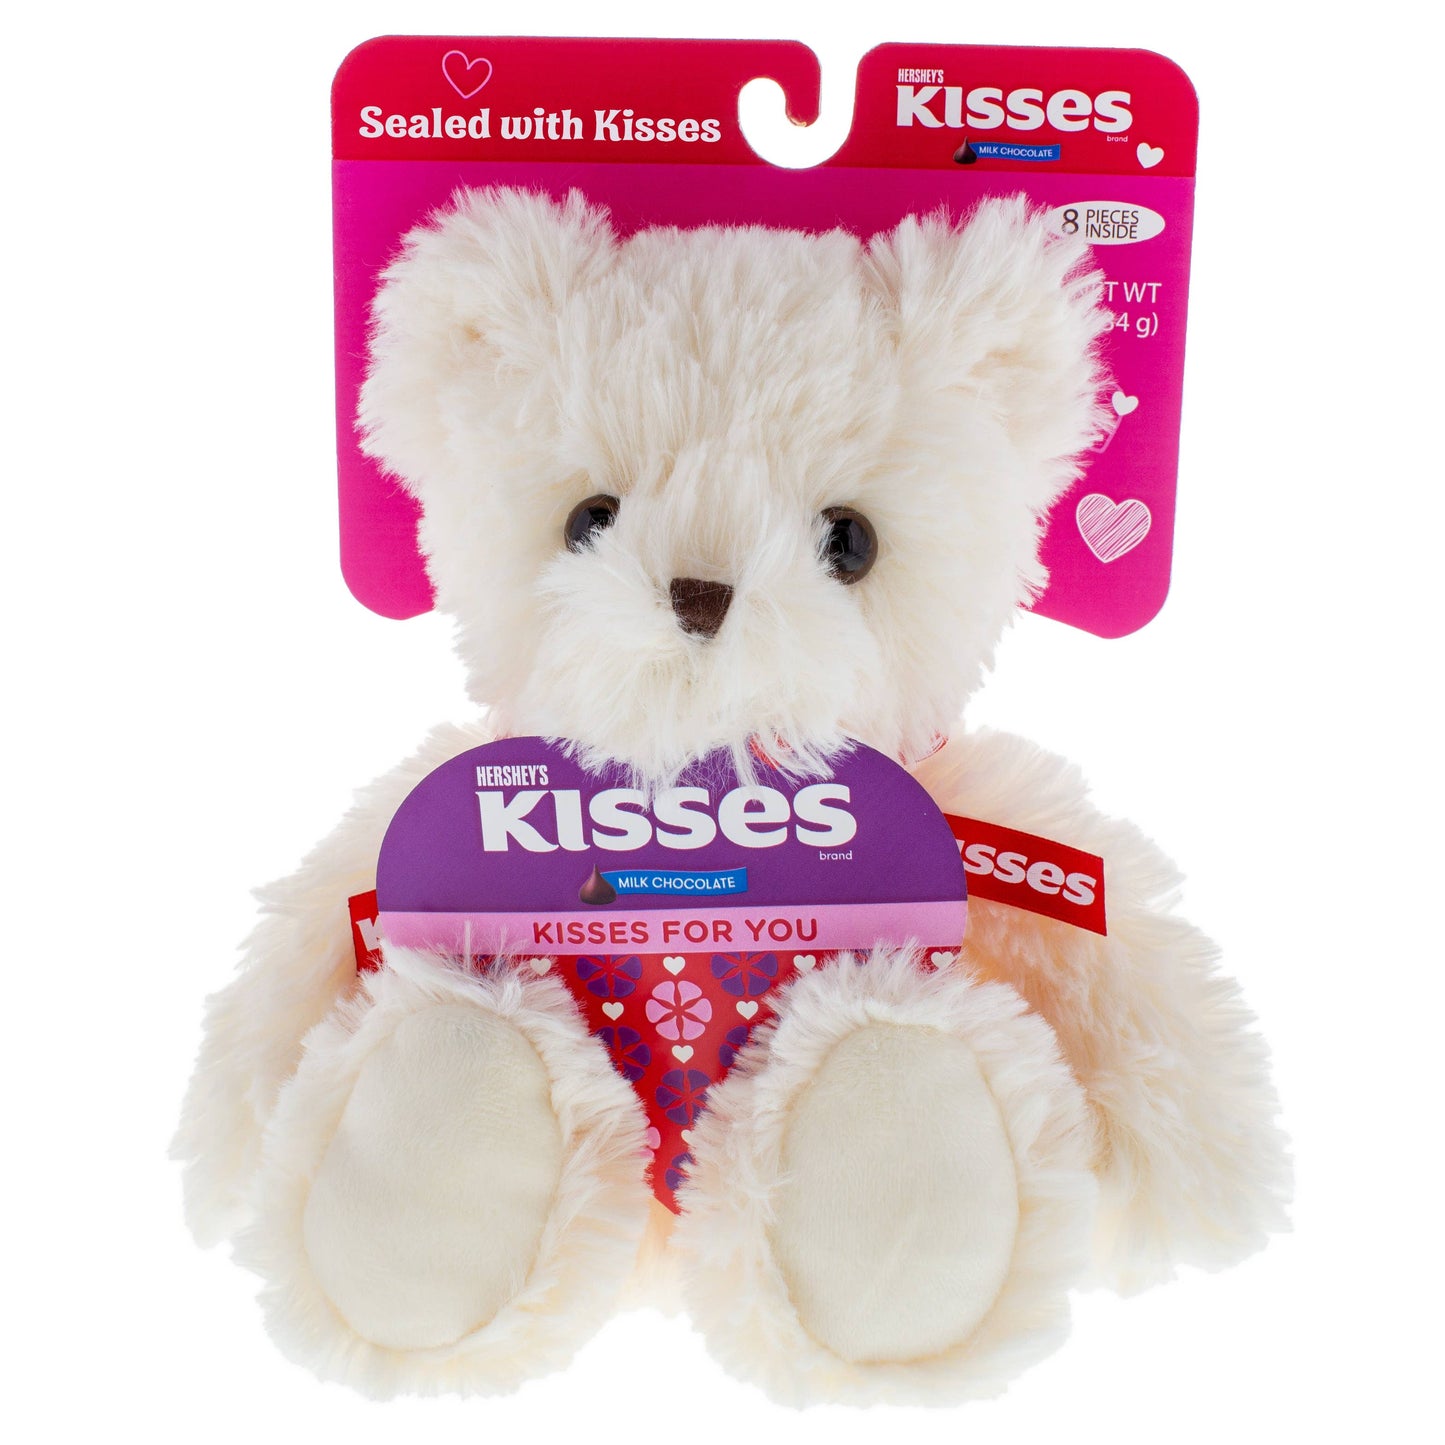 Hershey's Kisses Valentine's Day Bear with Candy (case)